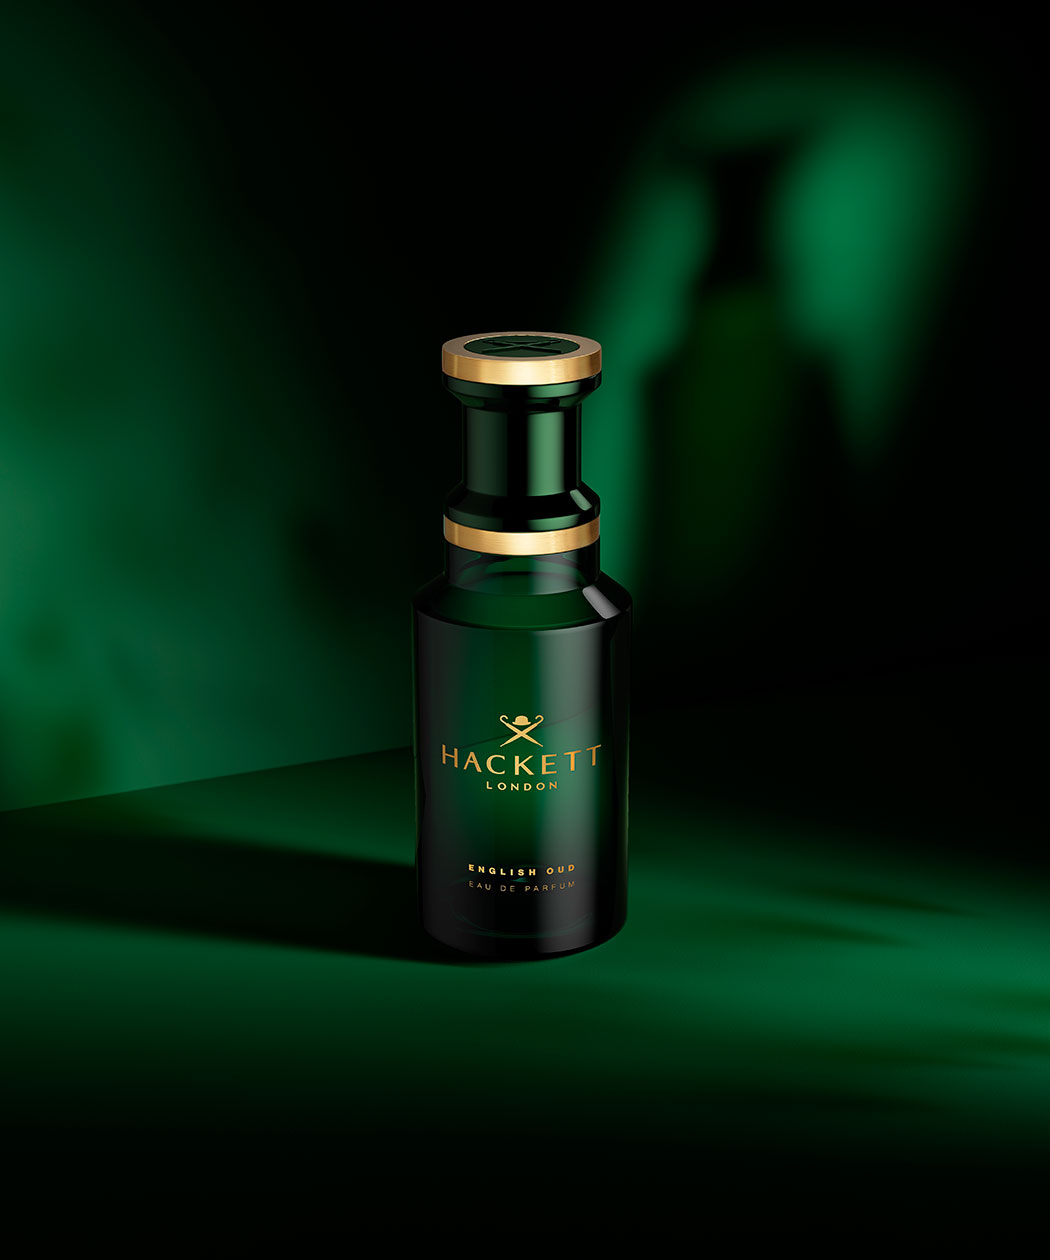 Green fragrance bottle with gold lid 